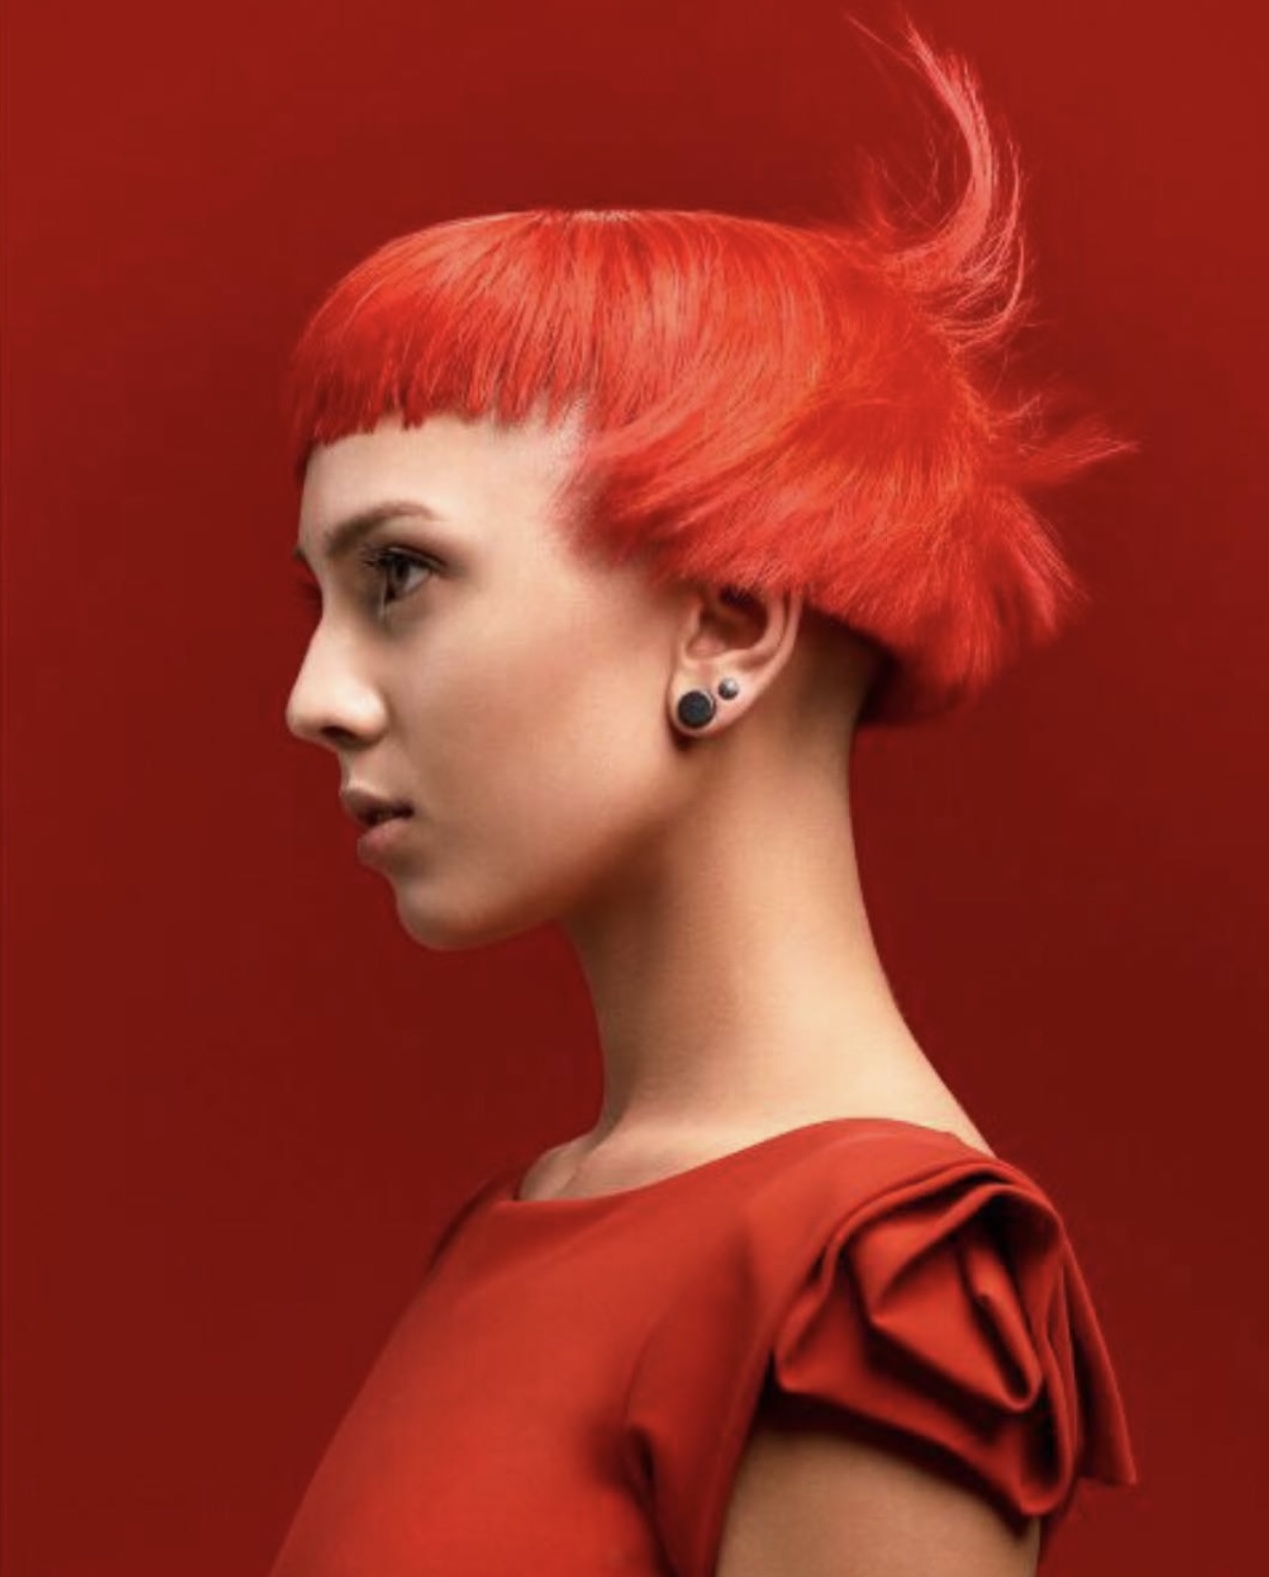 Sideview of a woman with stylish, red haircuit set on a red background